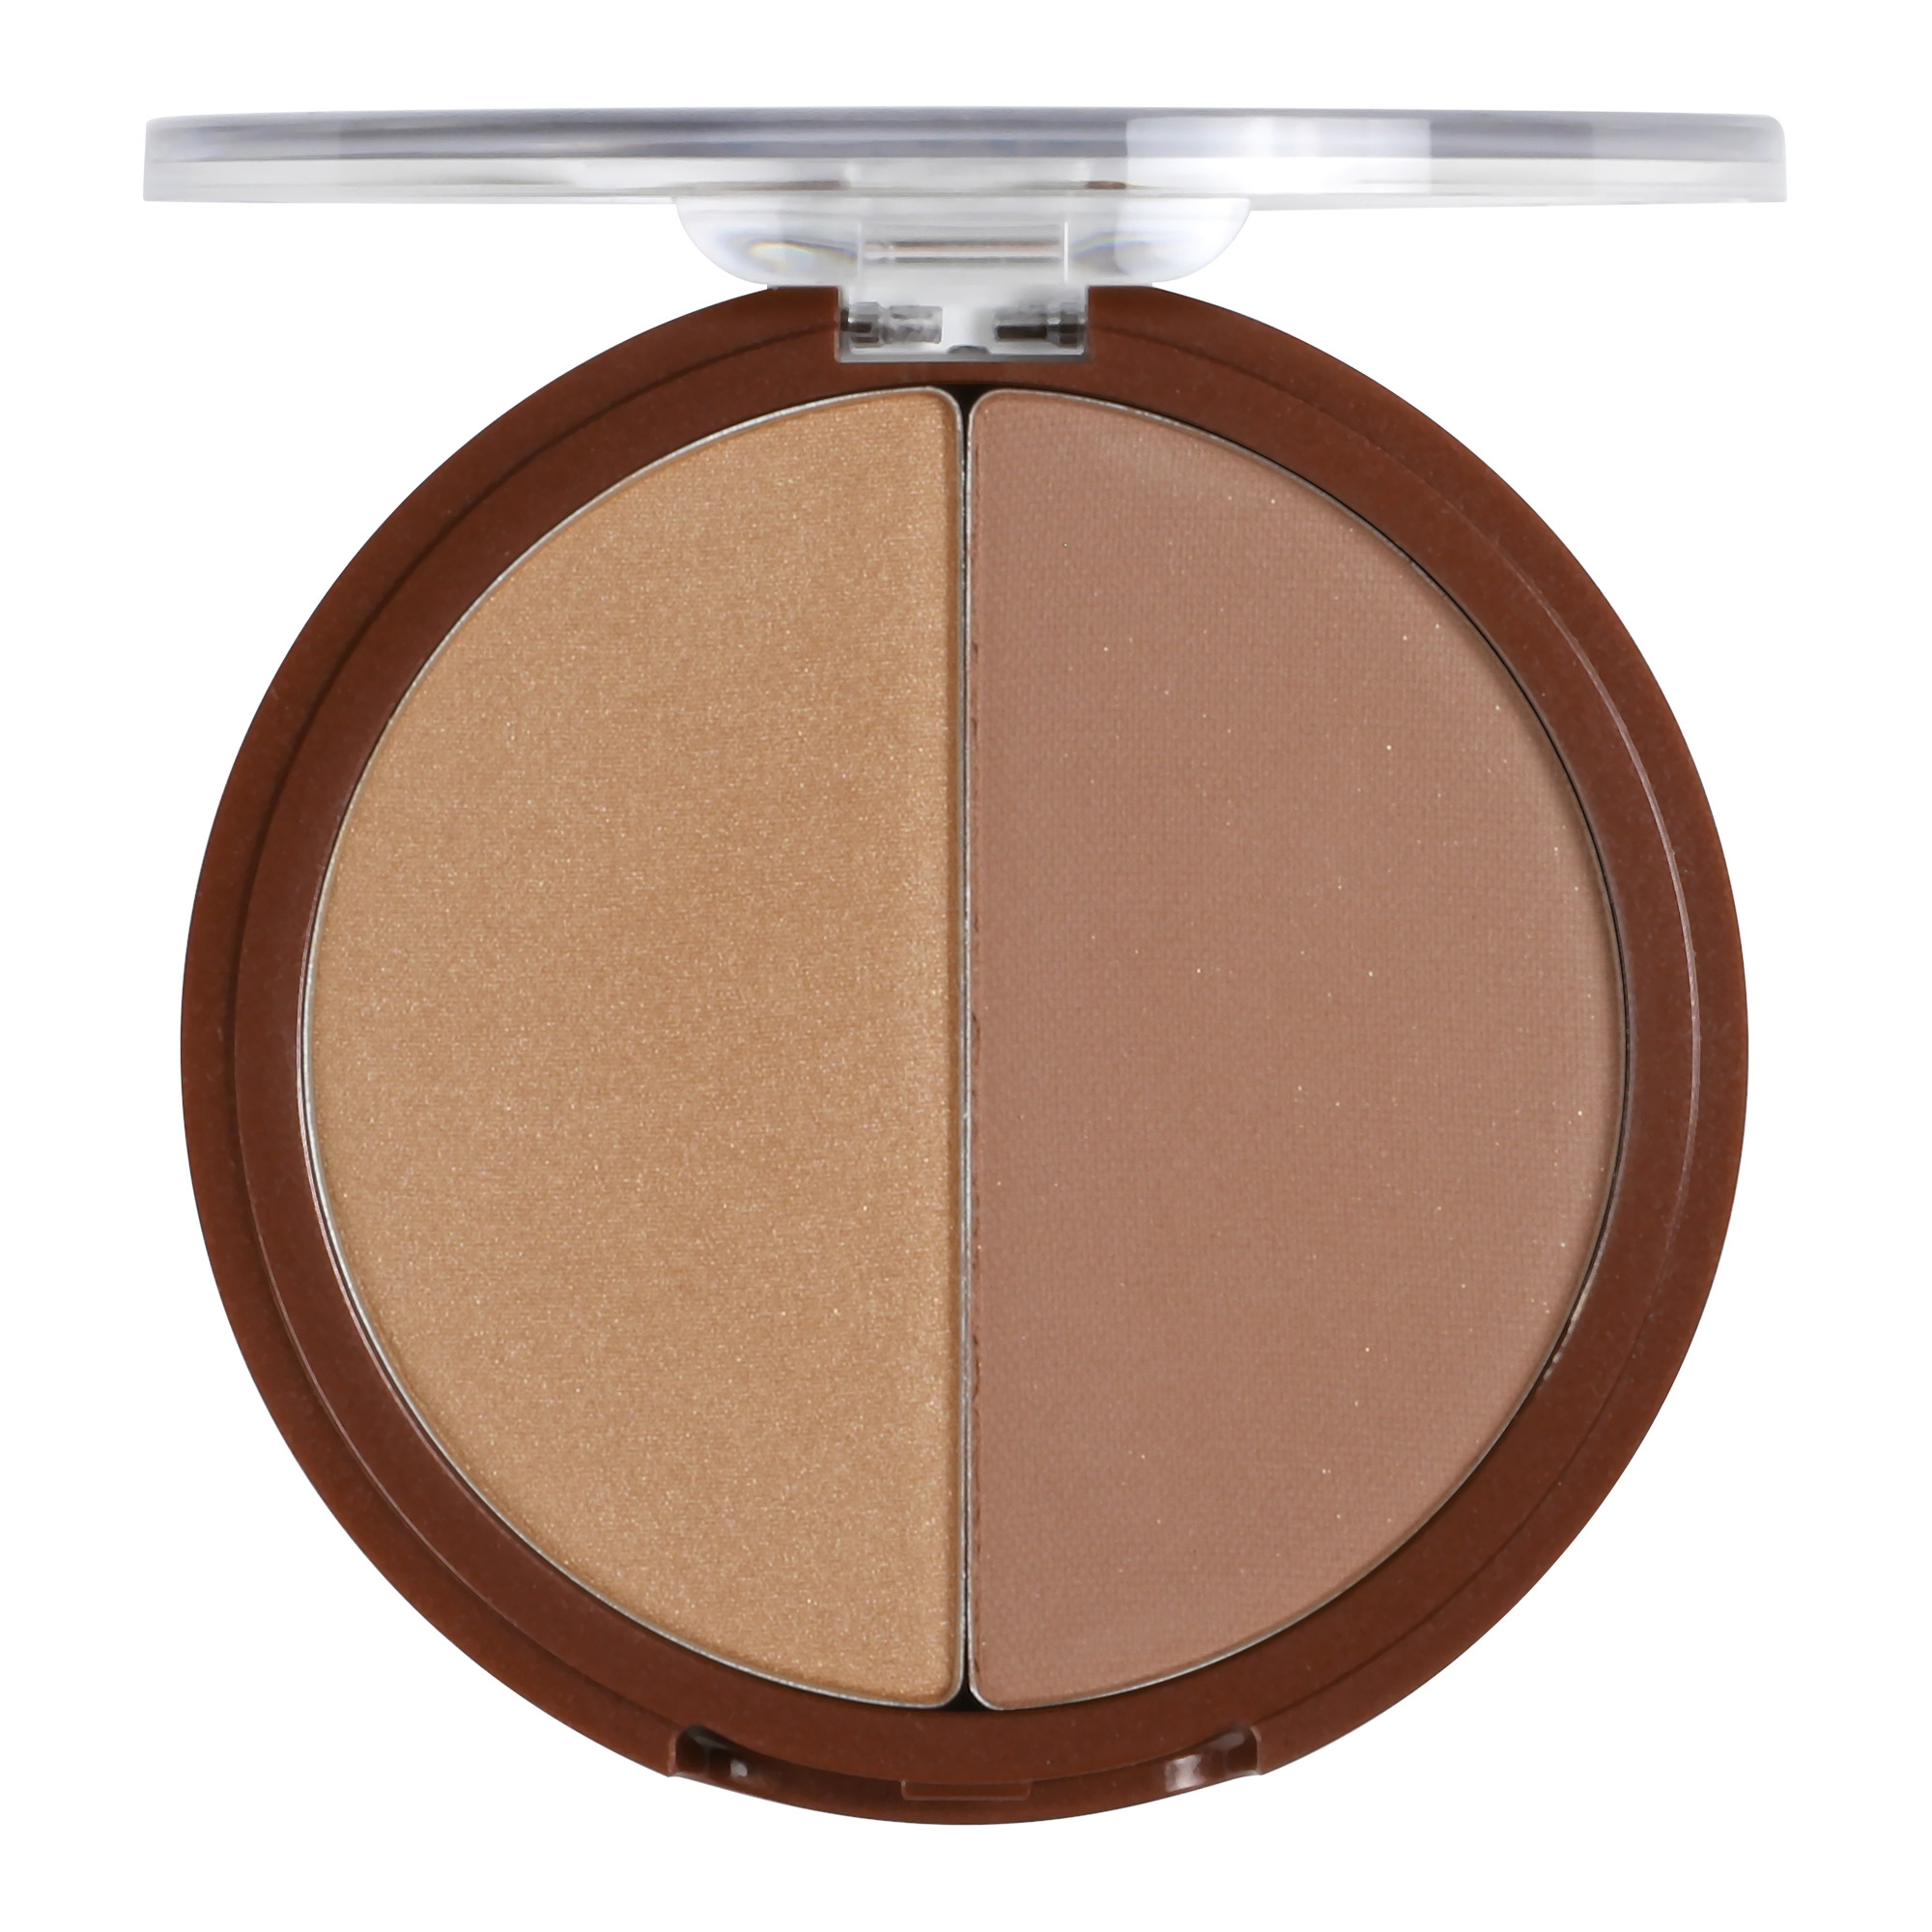 Mineral Fusion Bronzer Duo Luster, 0.29 Oz Luster Bronzer duo